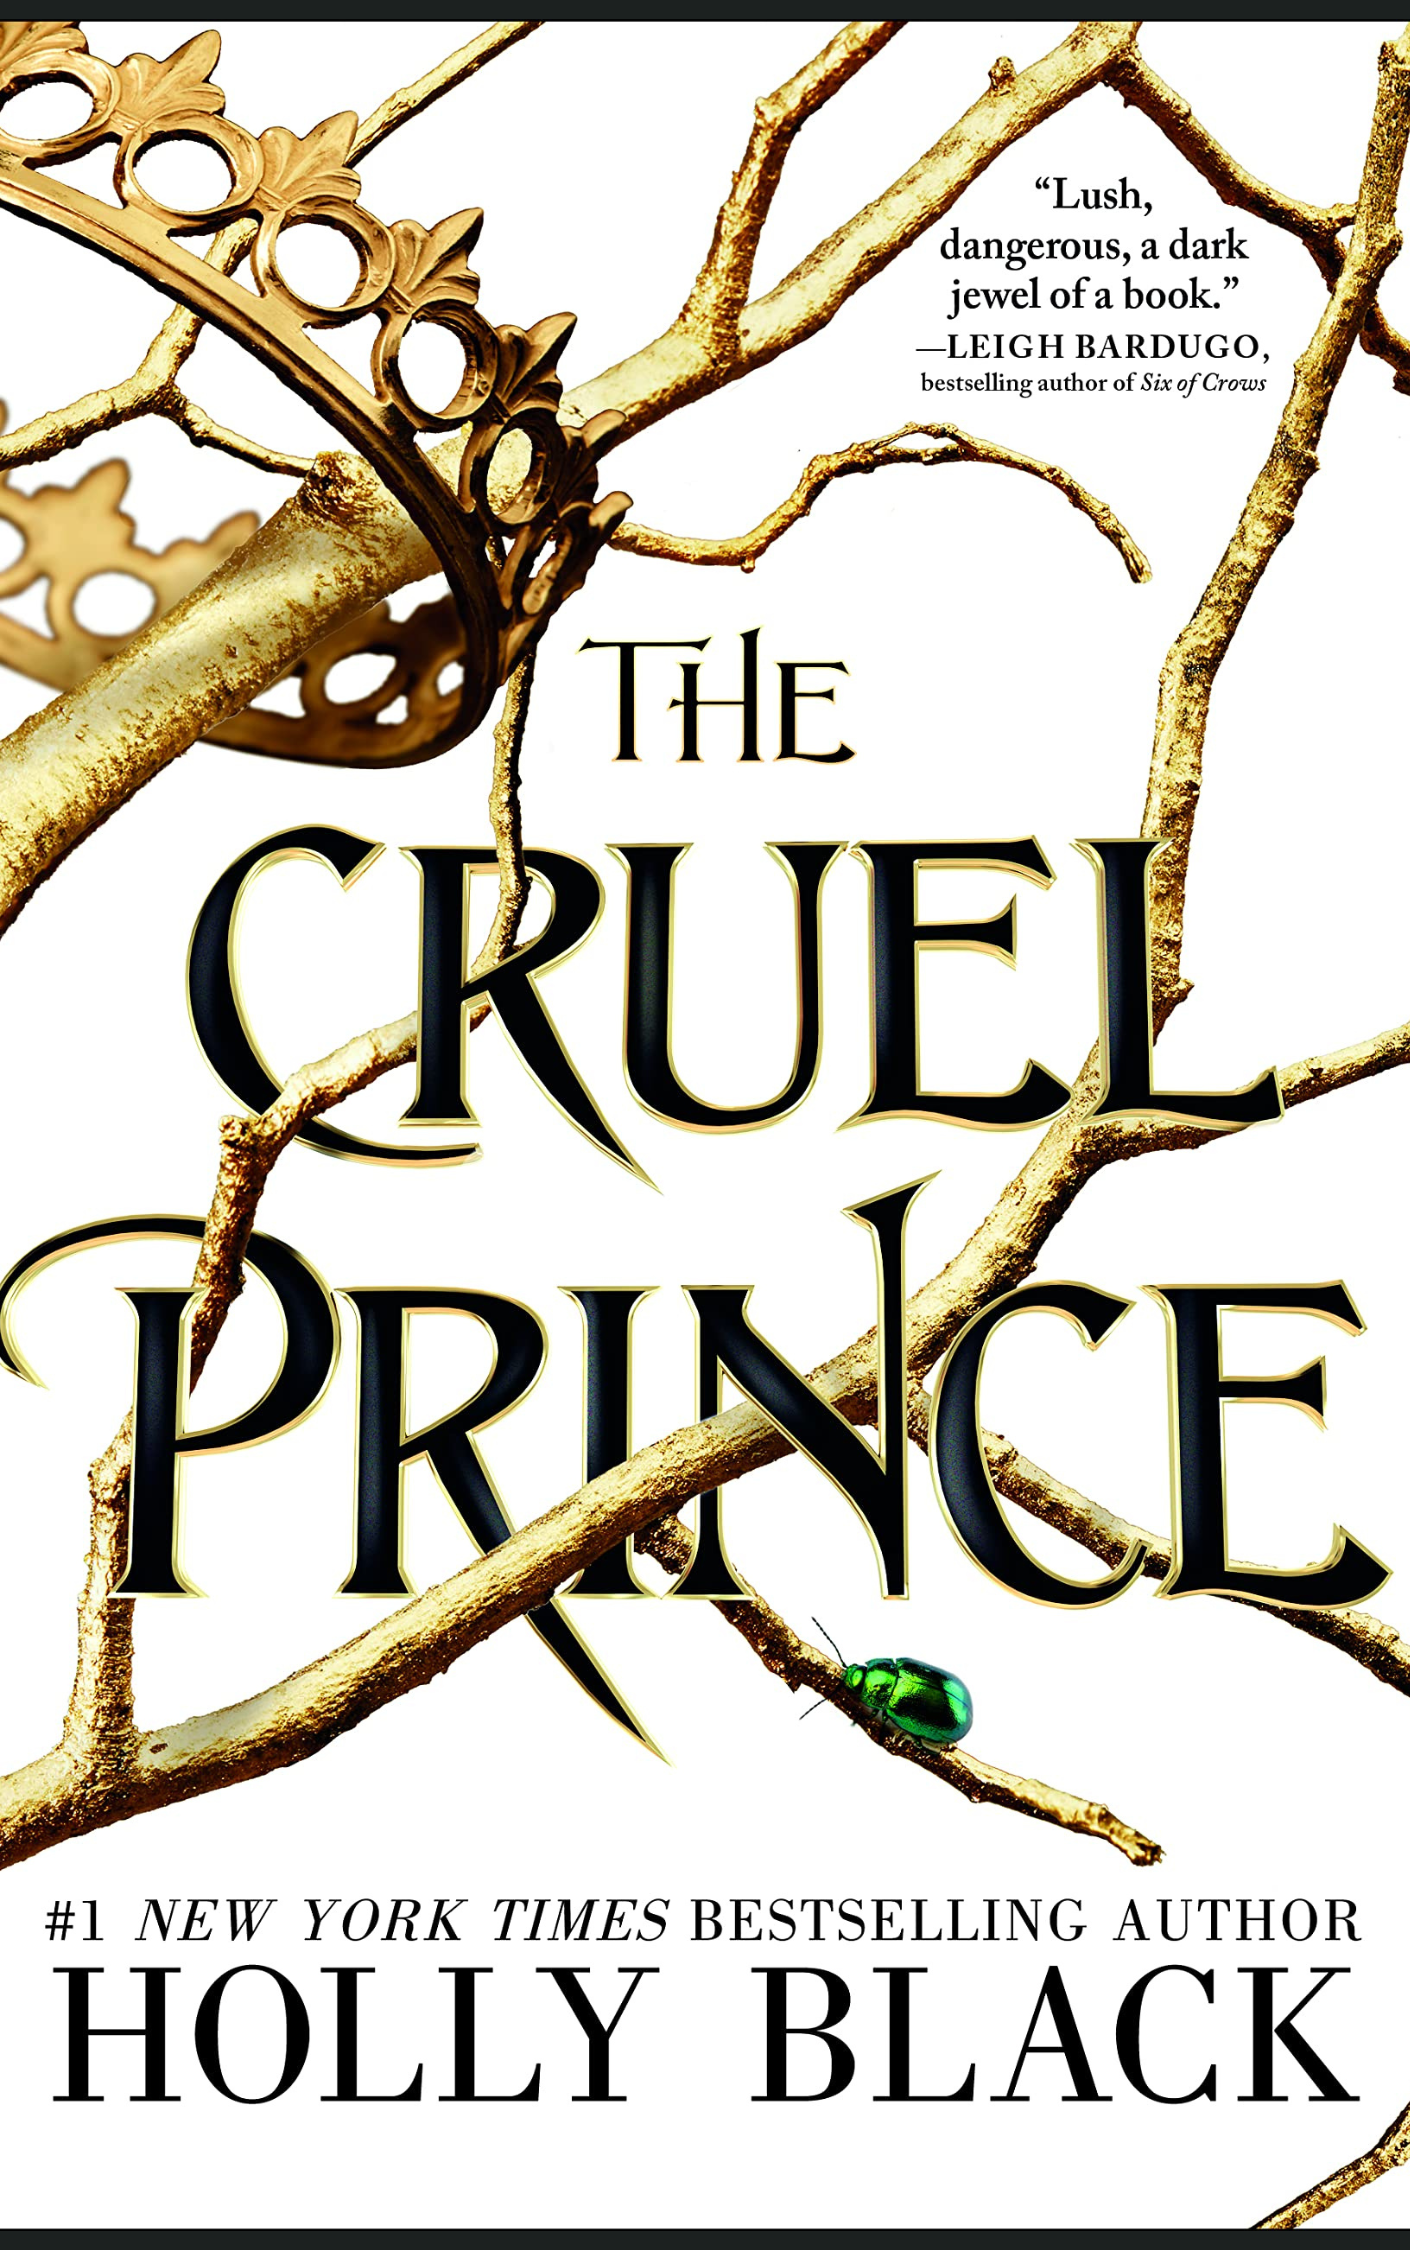 THE CRUEL PRINCE (THE FOLK OF THE AIR #1) BY HOLLY BLACK